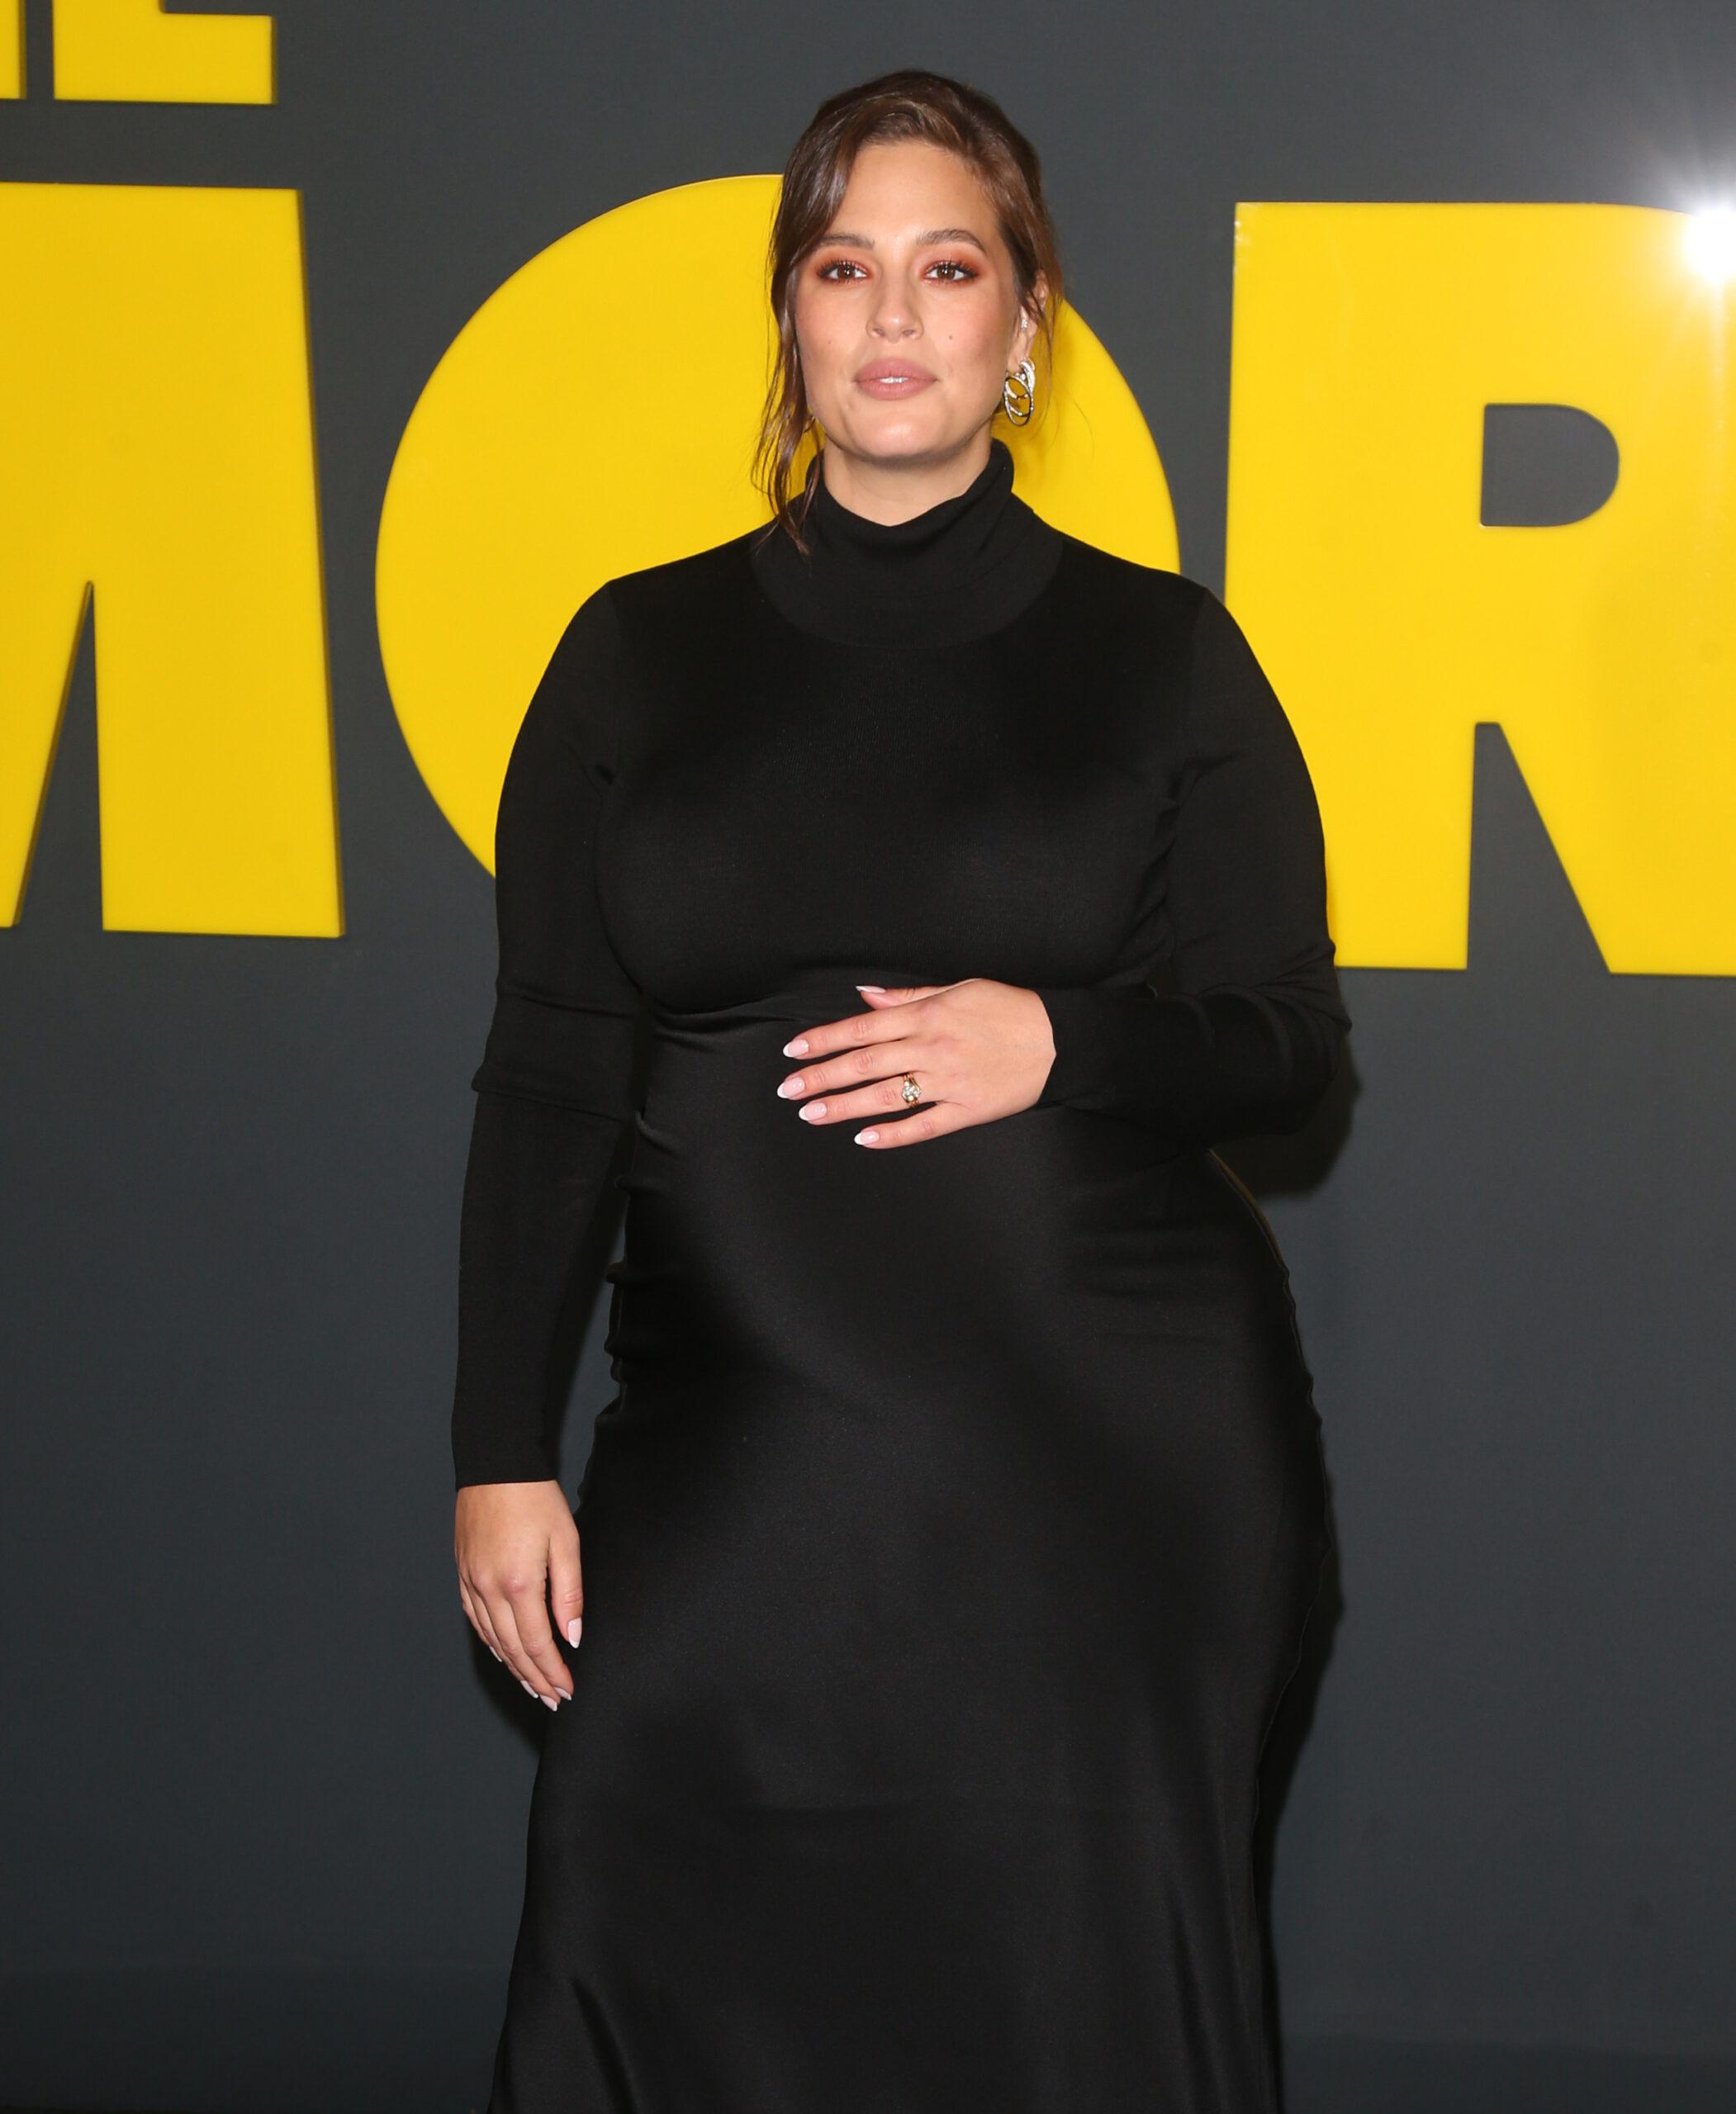 Ashley Graham The Morning Show Premiere in New York City